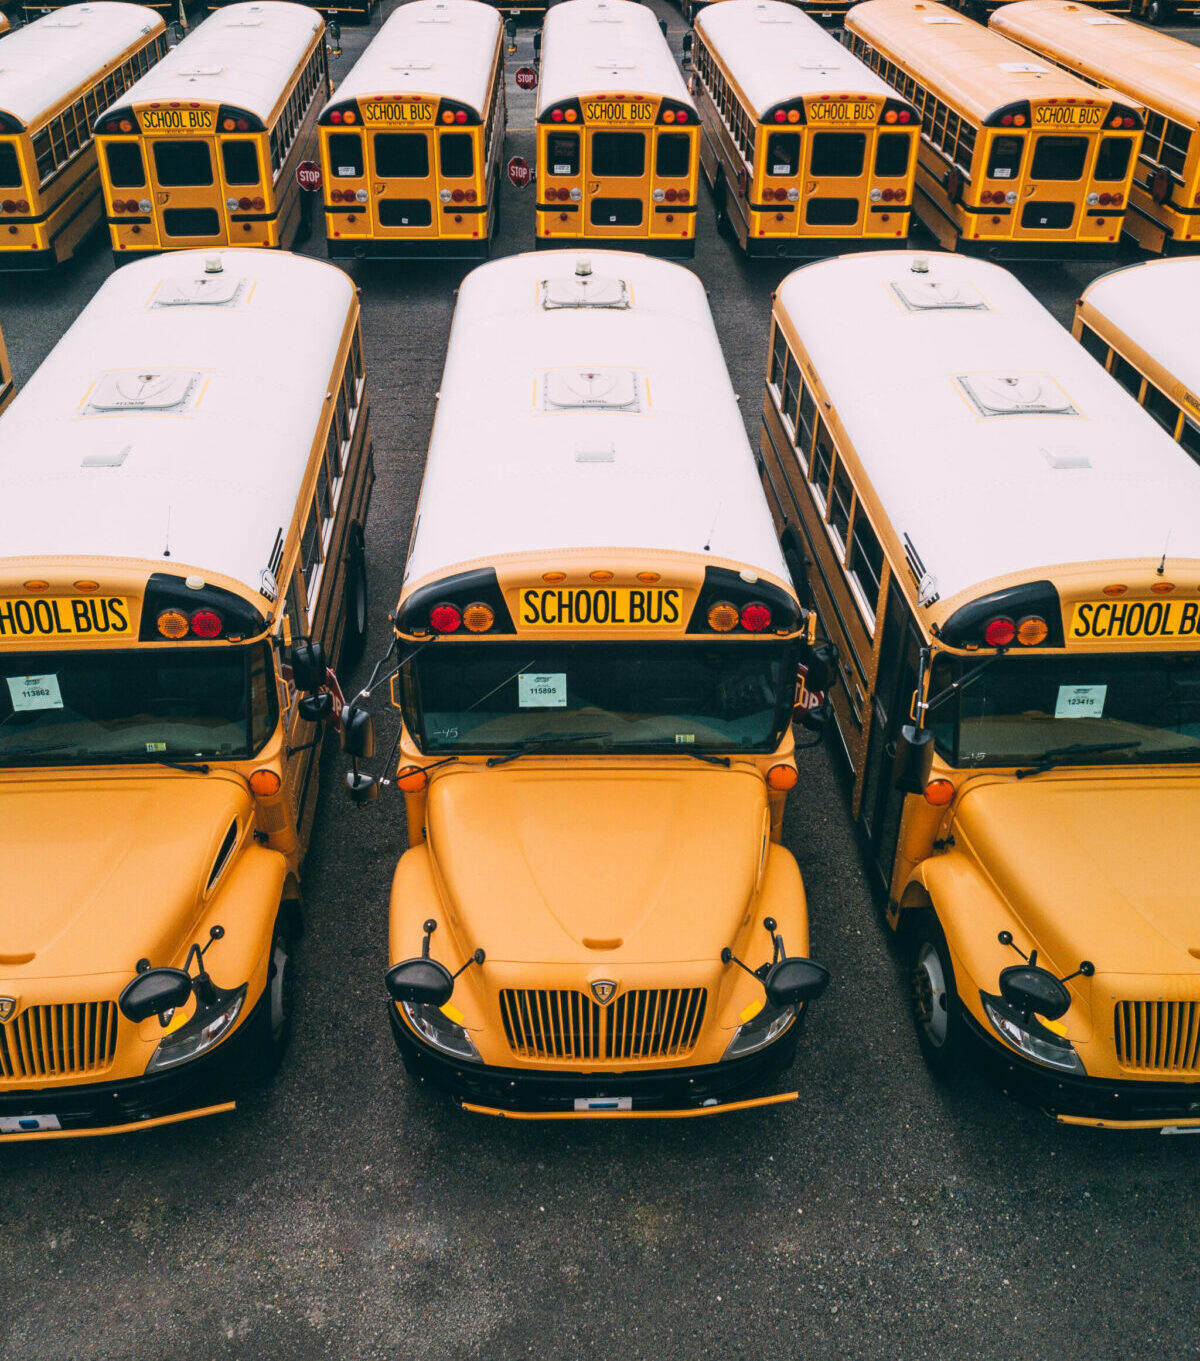 5 takeaways from The State of School Transportation 2021 Report